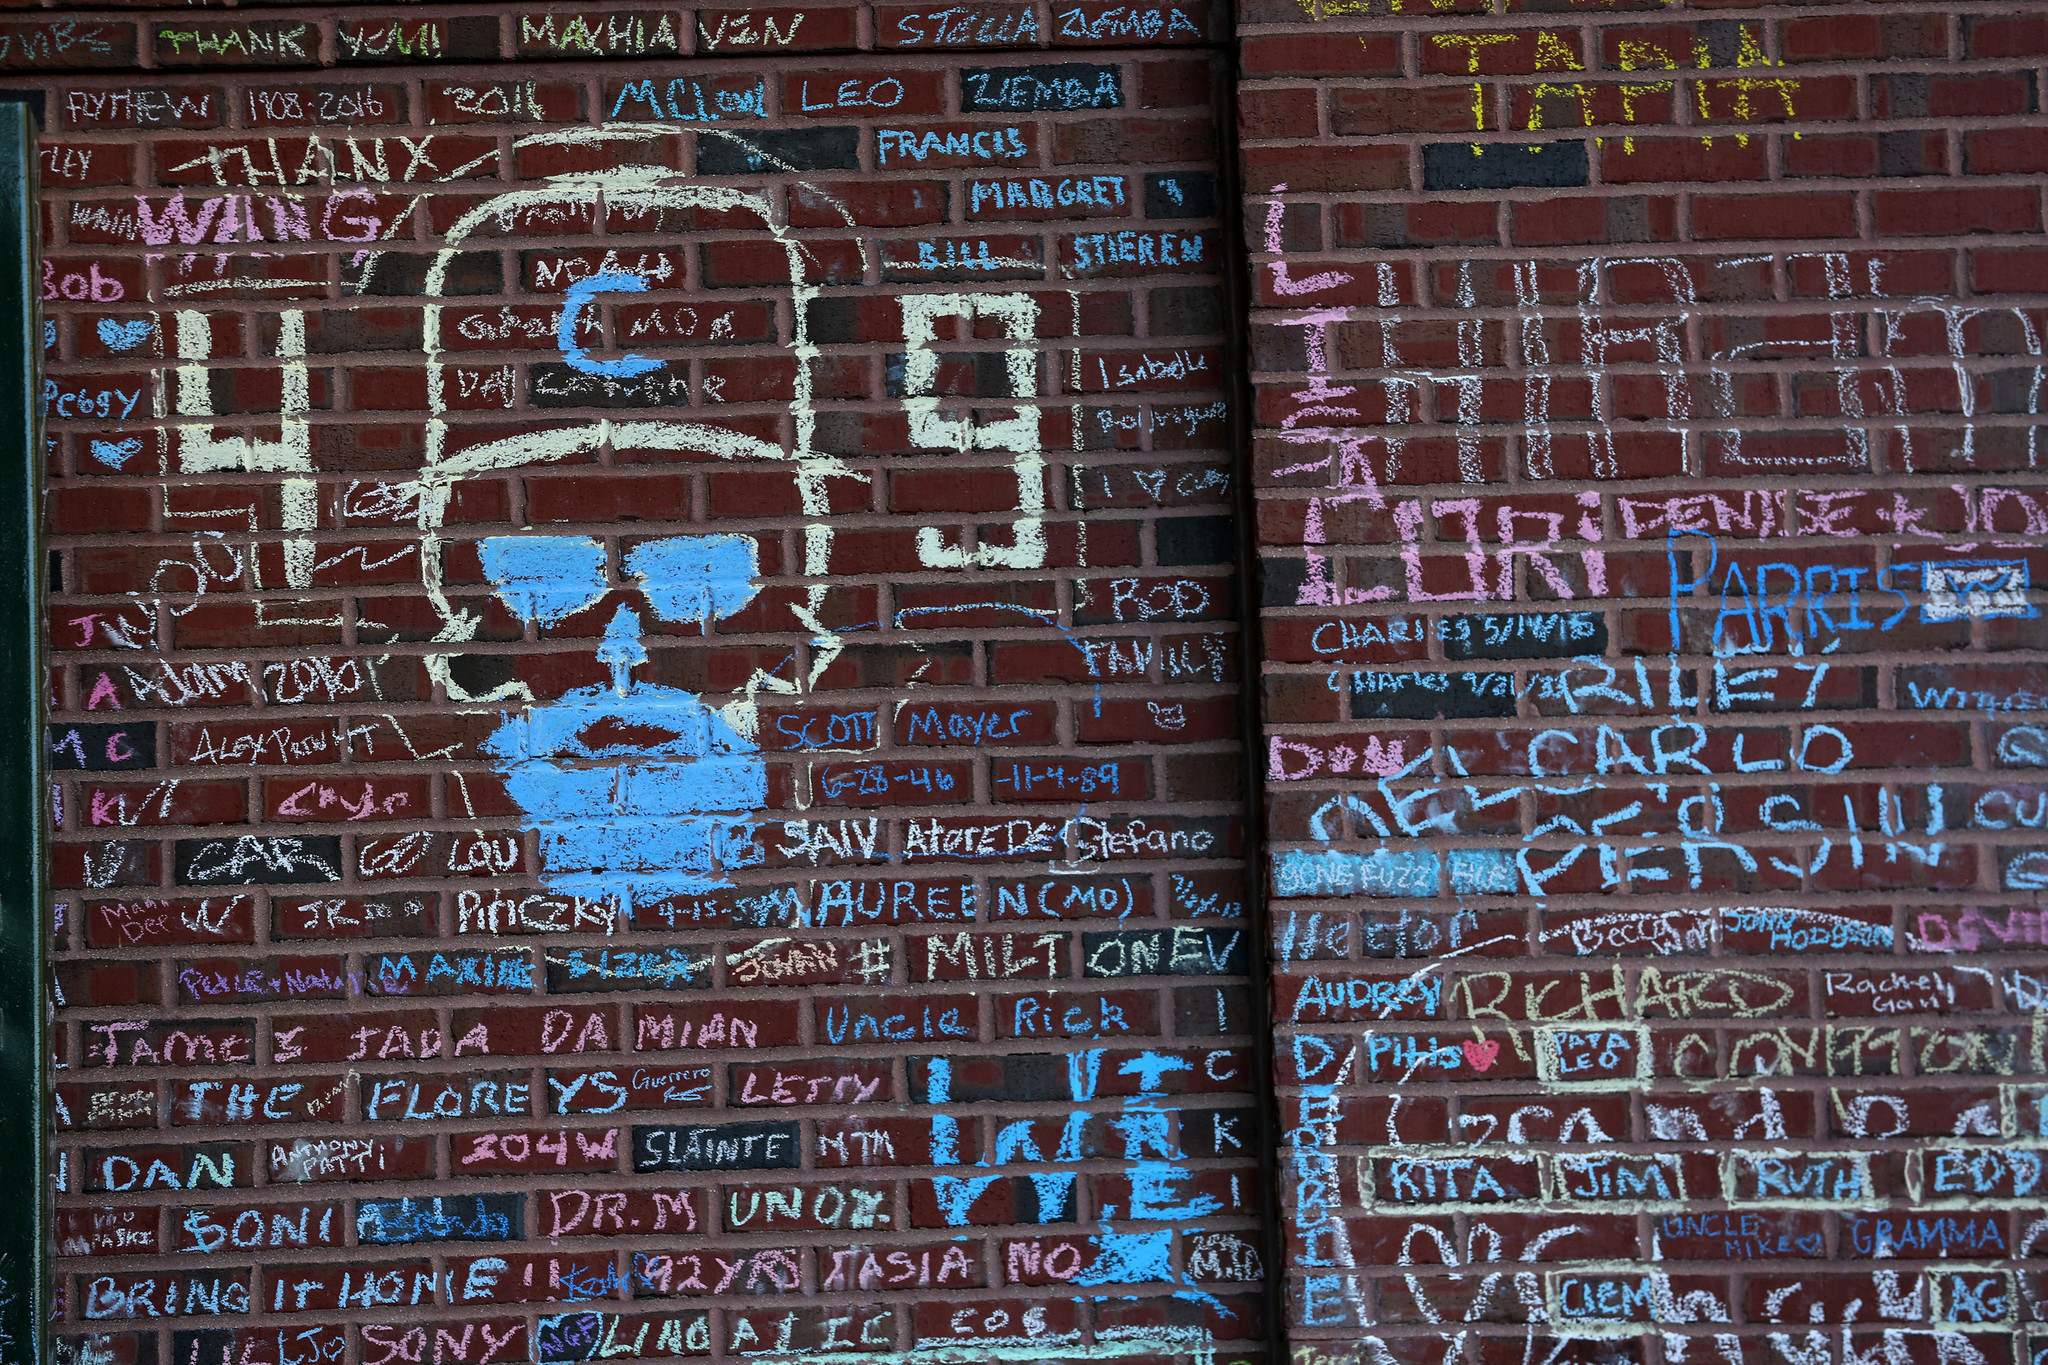 Chalk messages on the Wrigley Field wall - Chicago Tribune